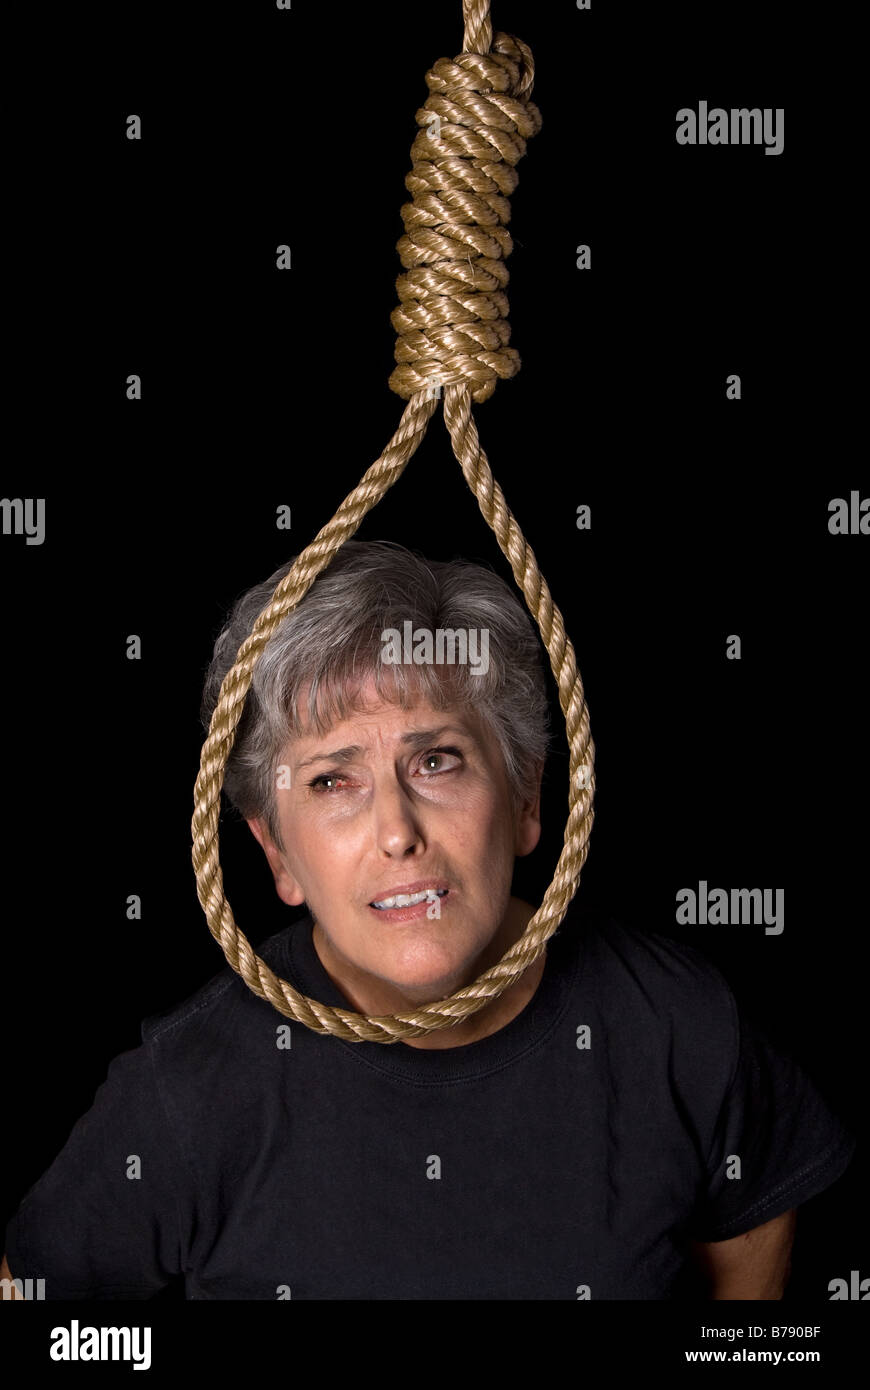 An elderly woman prepares to commit suicide by hanging Stock Photo